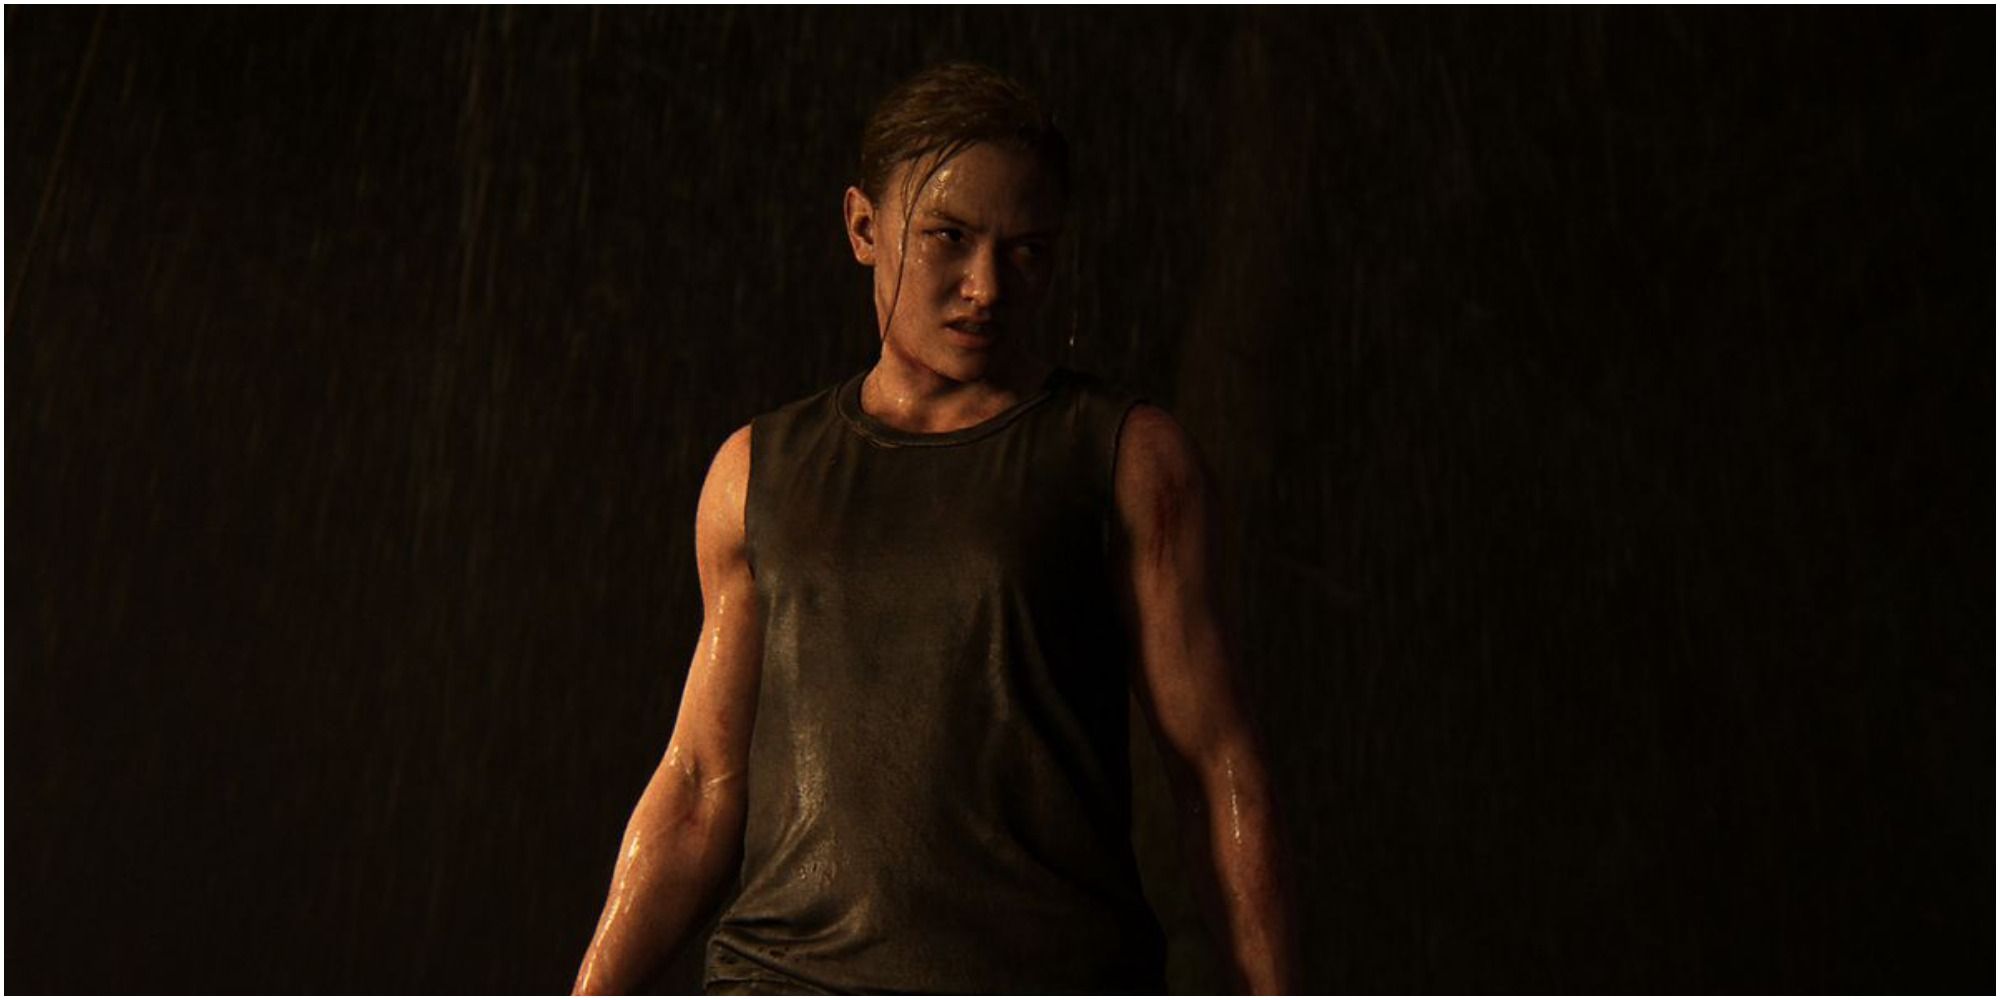 Abby from The Last Of Us Part II stands in firelight.